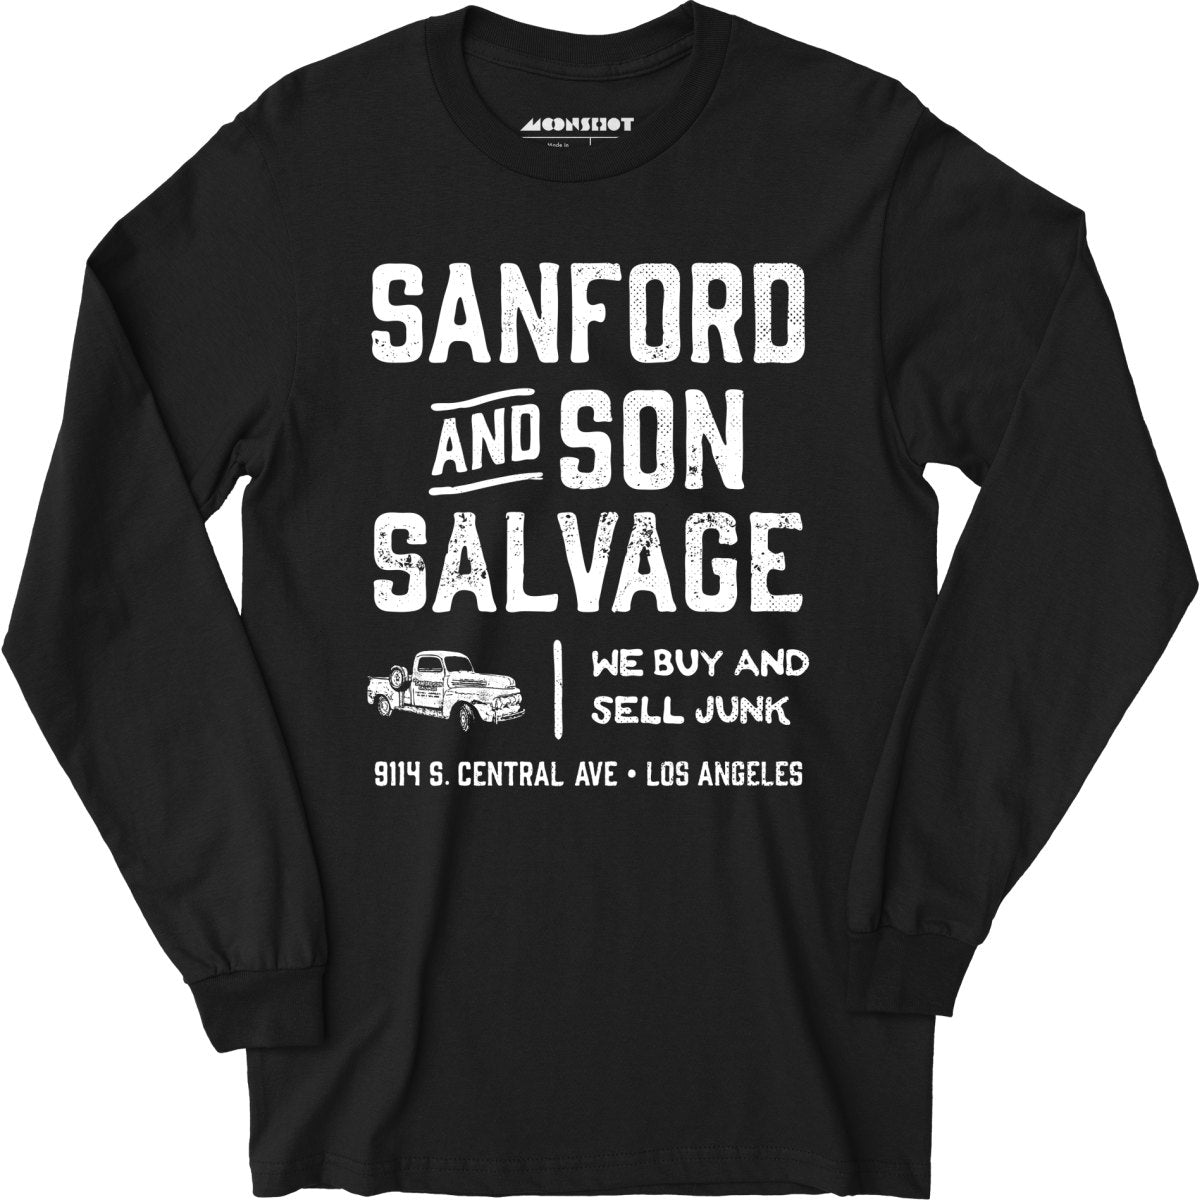 Sanford and Son Salvage - Long Sleeve T-Shirt